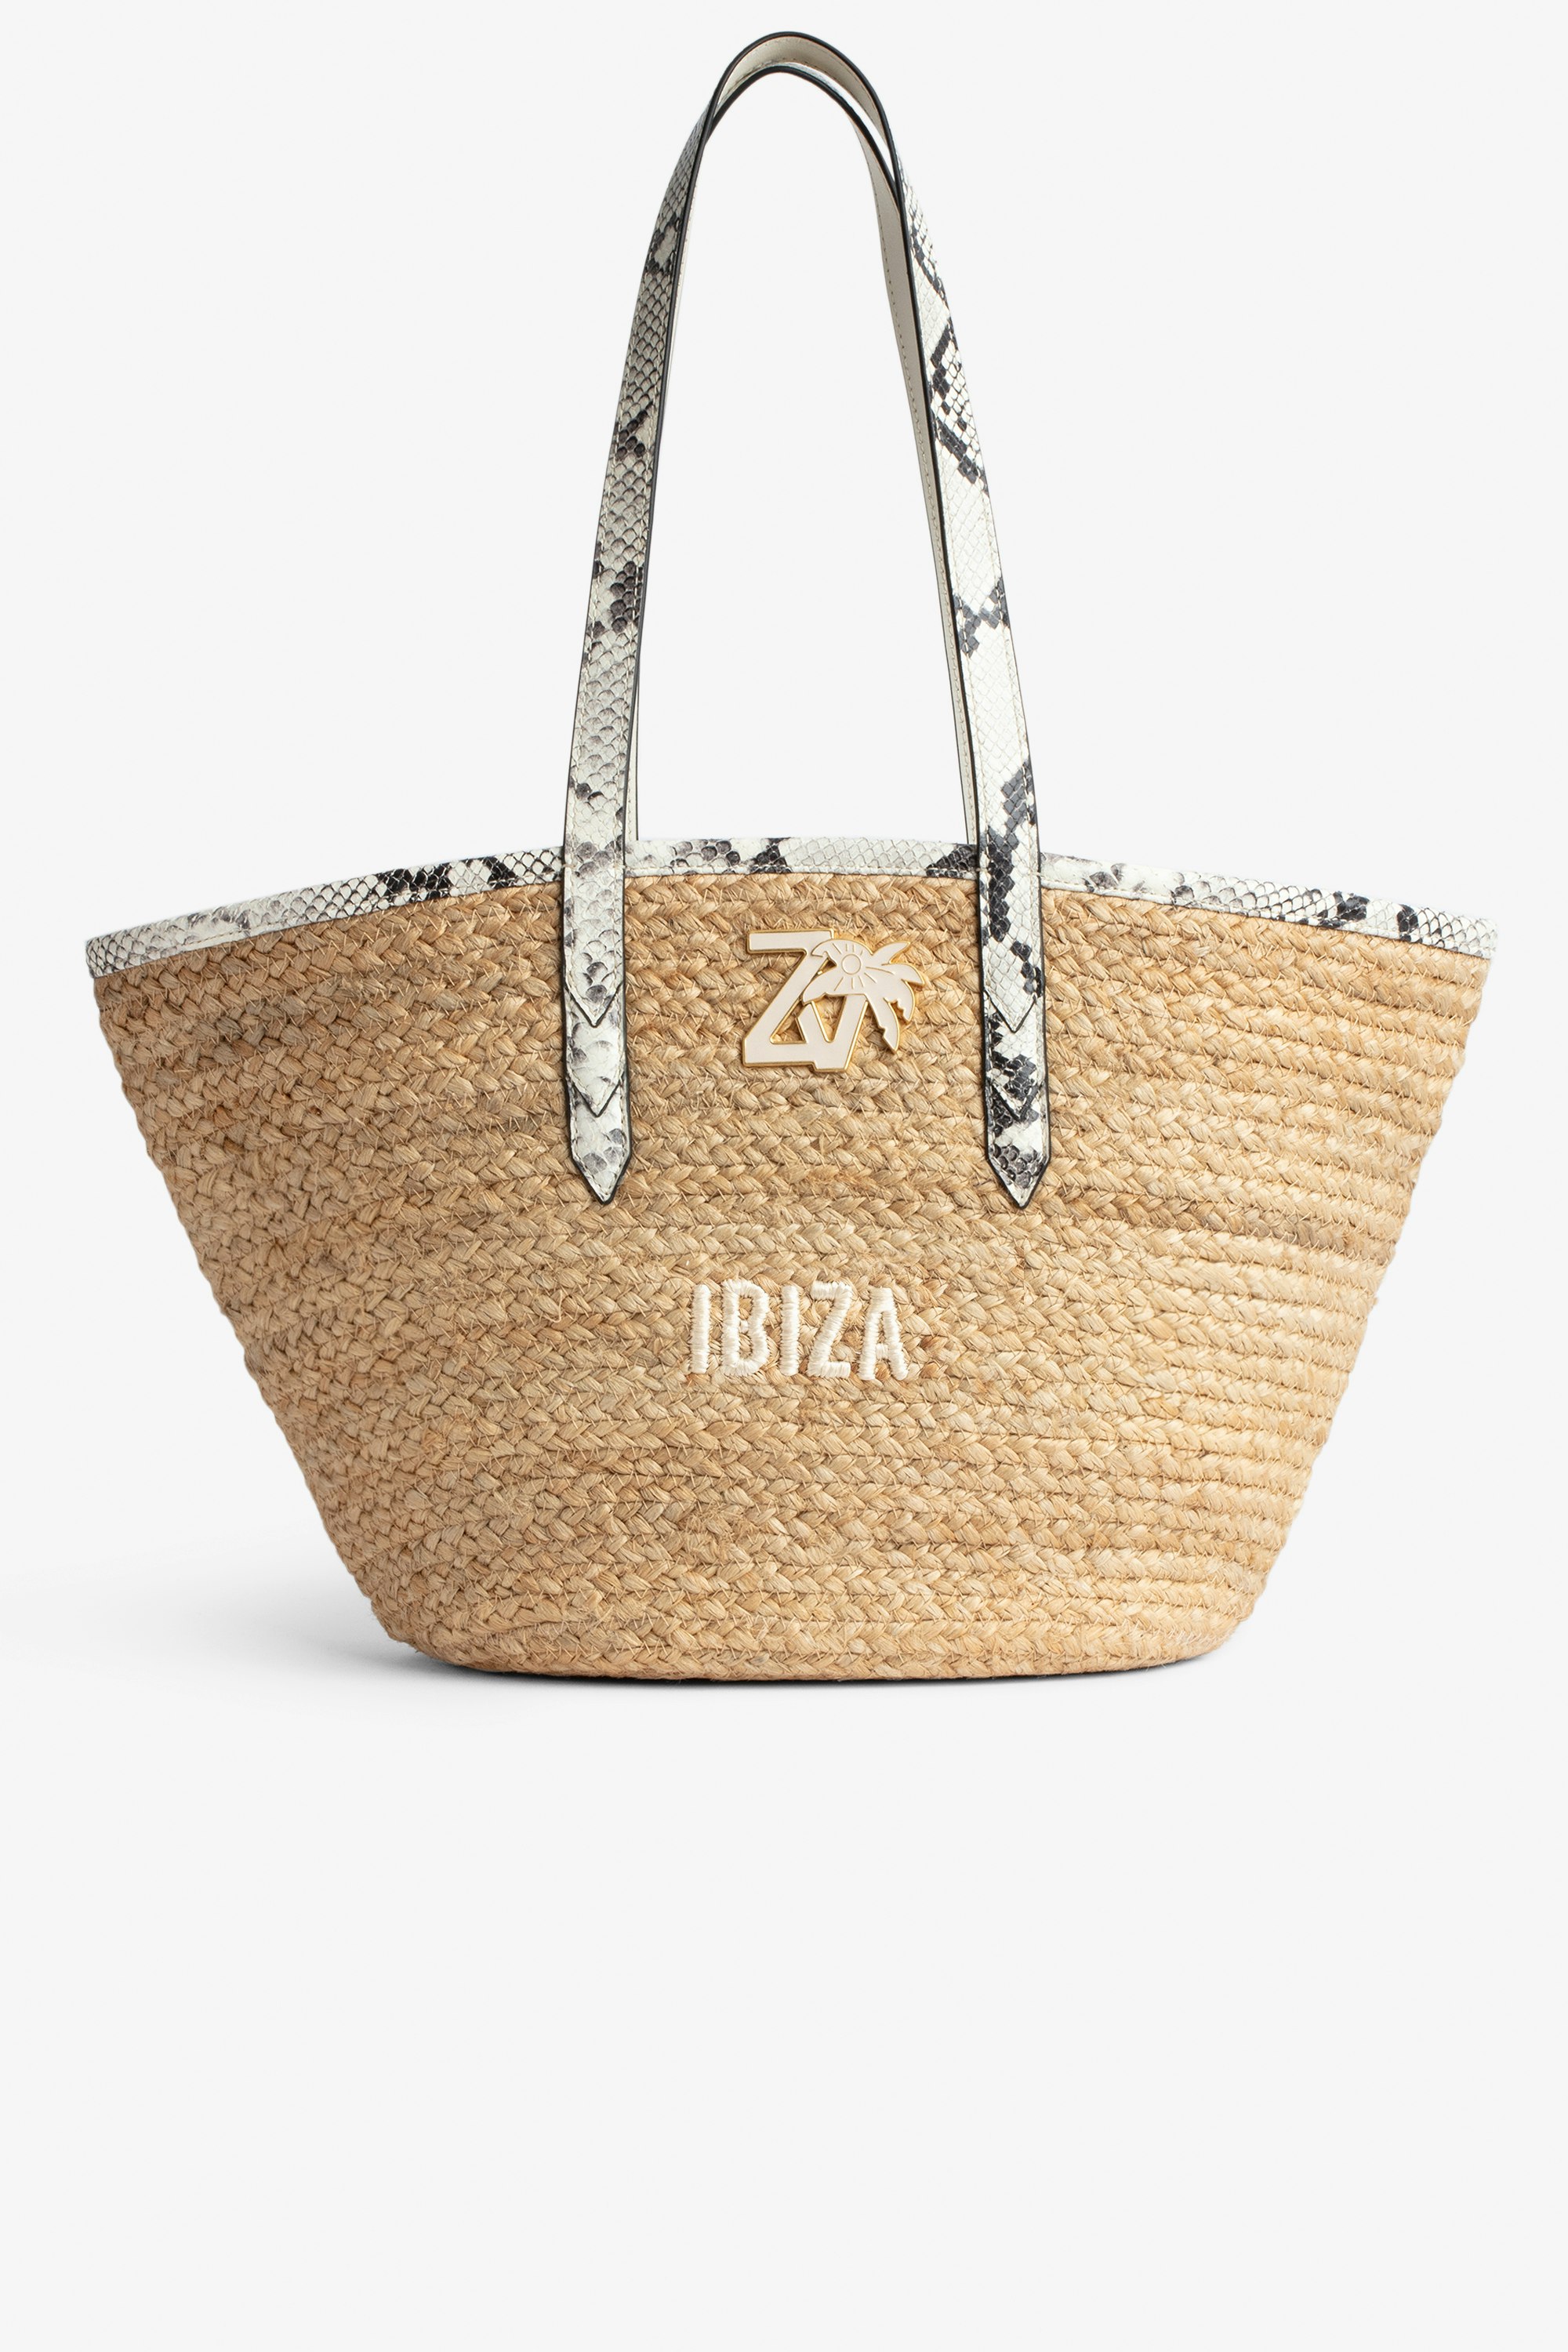 Le Beach Bag Women's straw bag with off-white snakeskin-effect leather handles, "Ibiza" embroidery and ZV charm